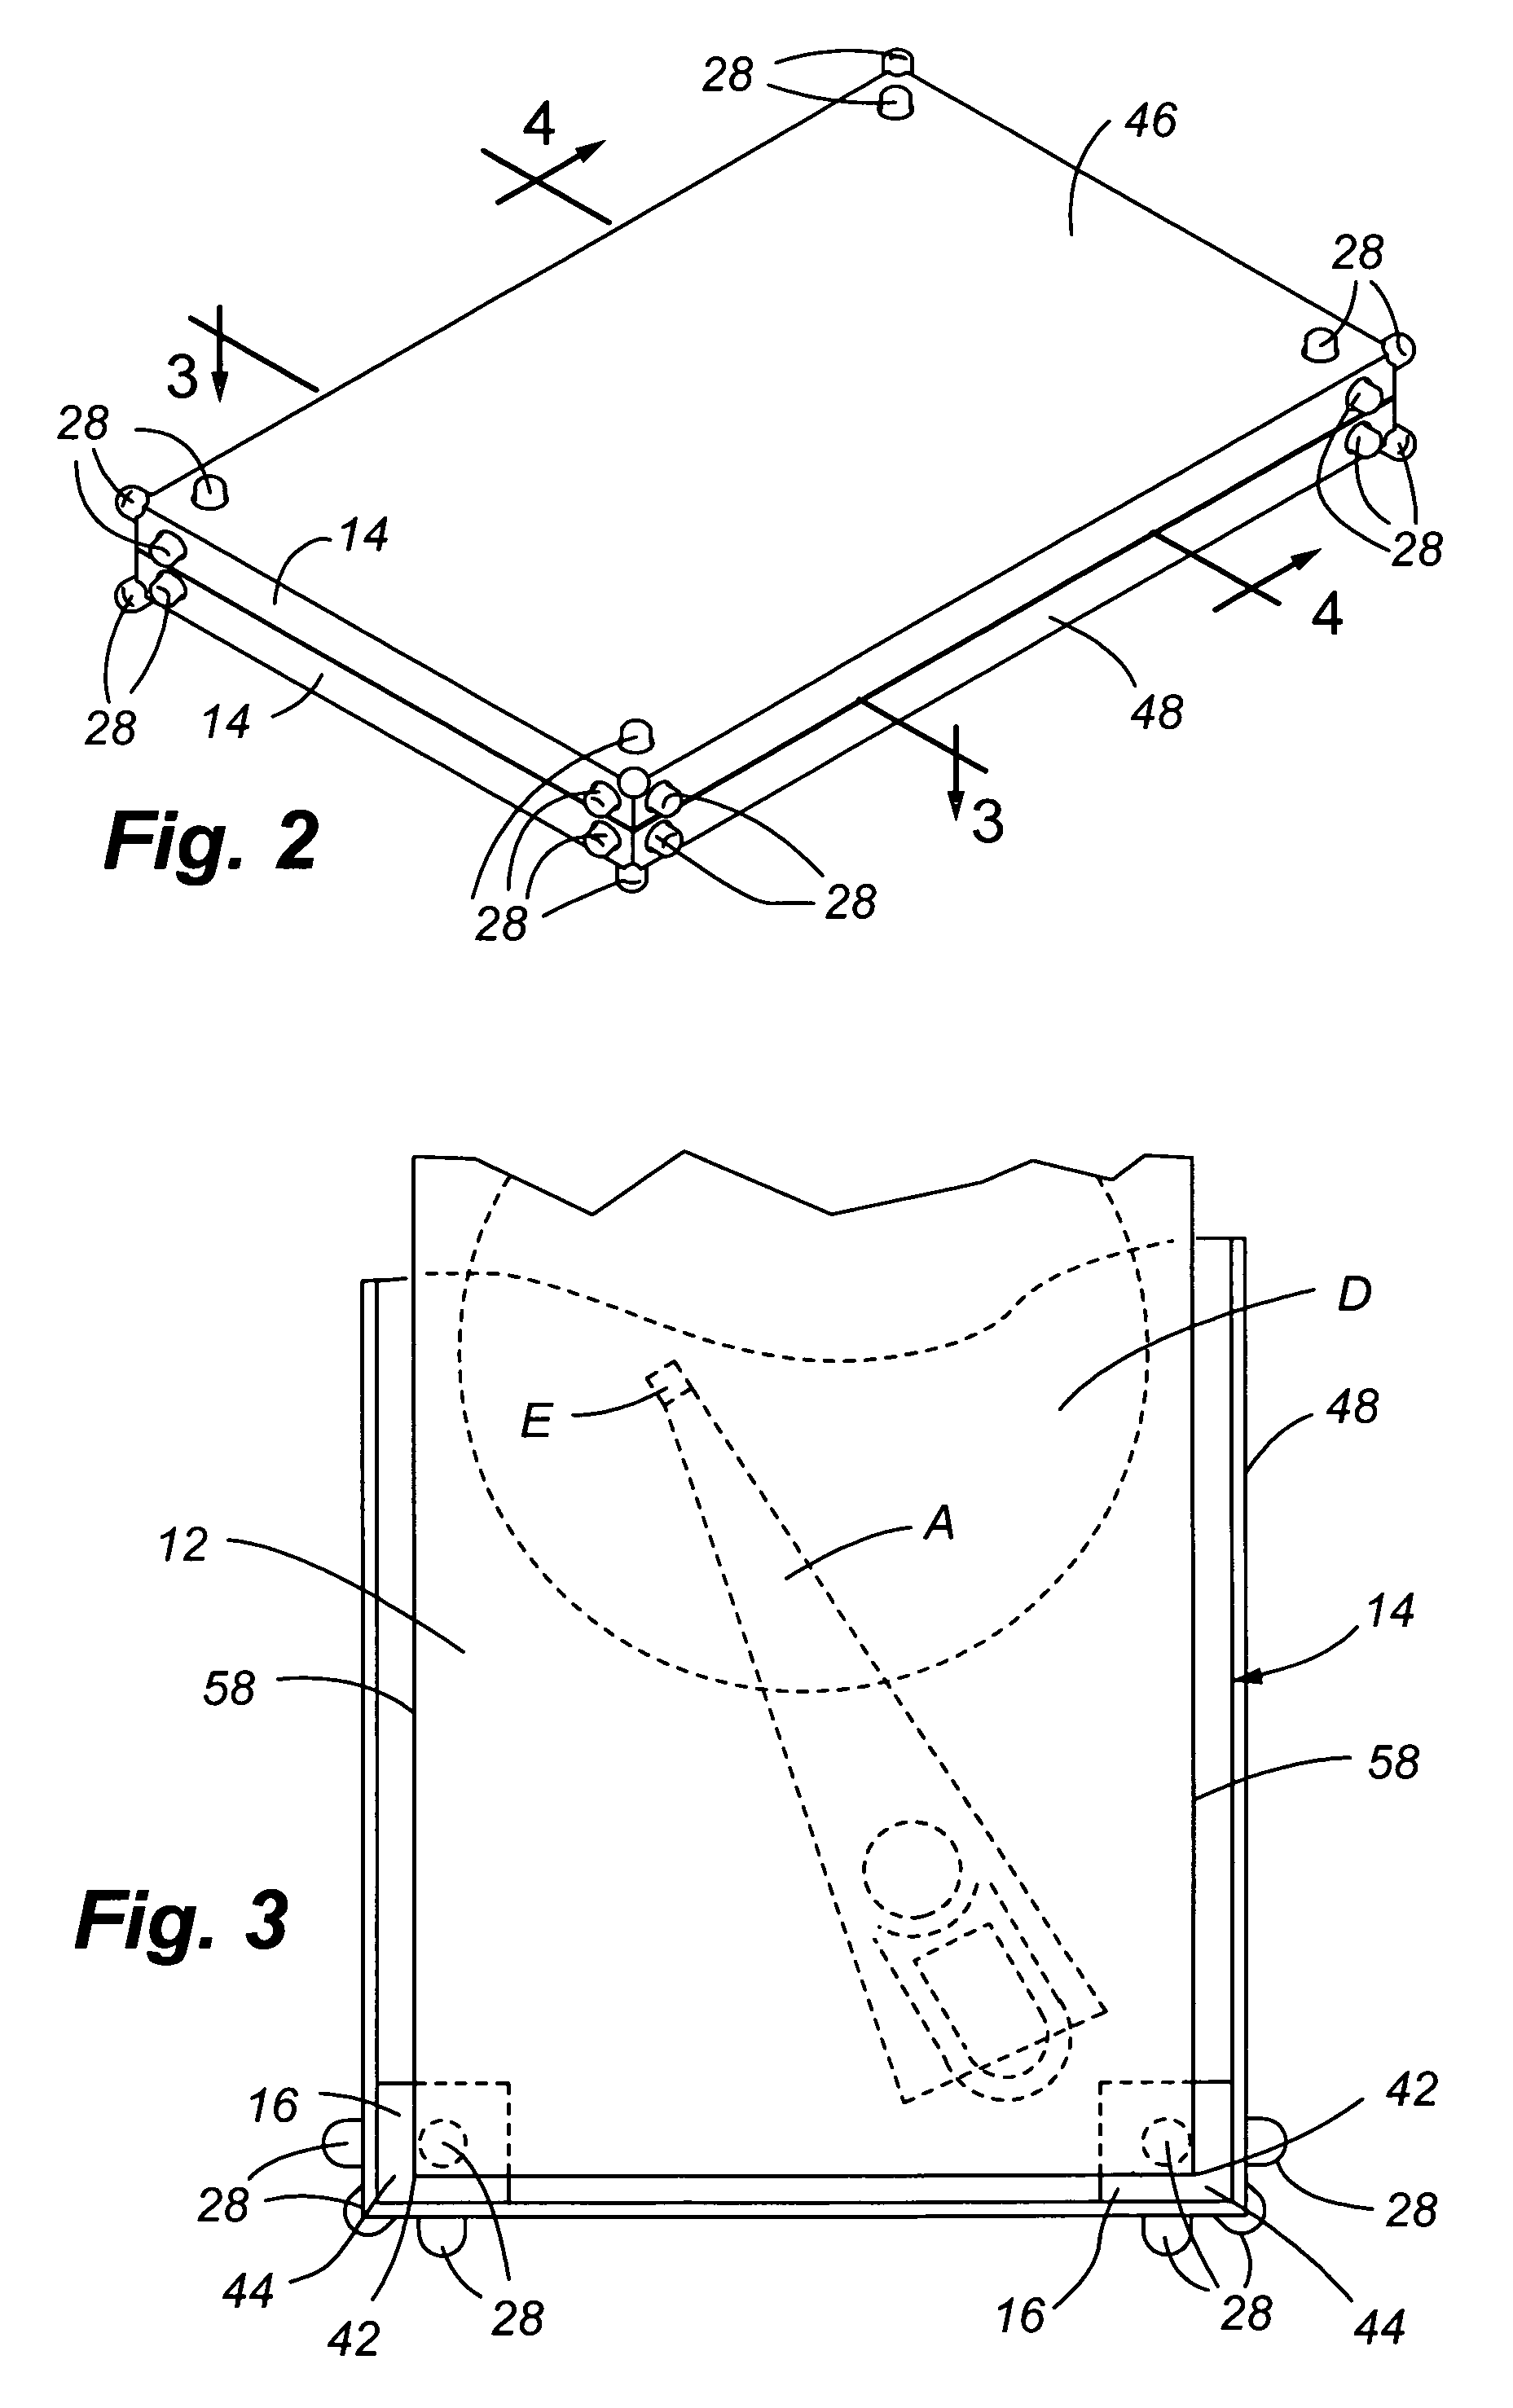 Shock protection for disk drive embedded in an enclosure